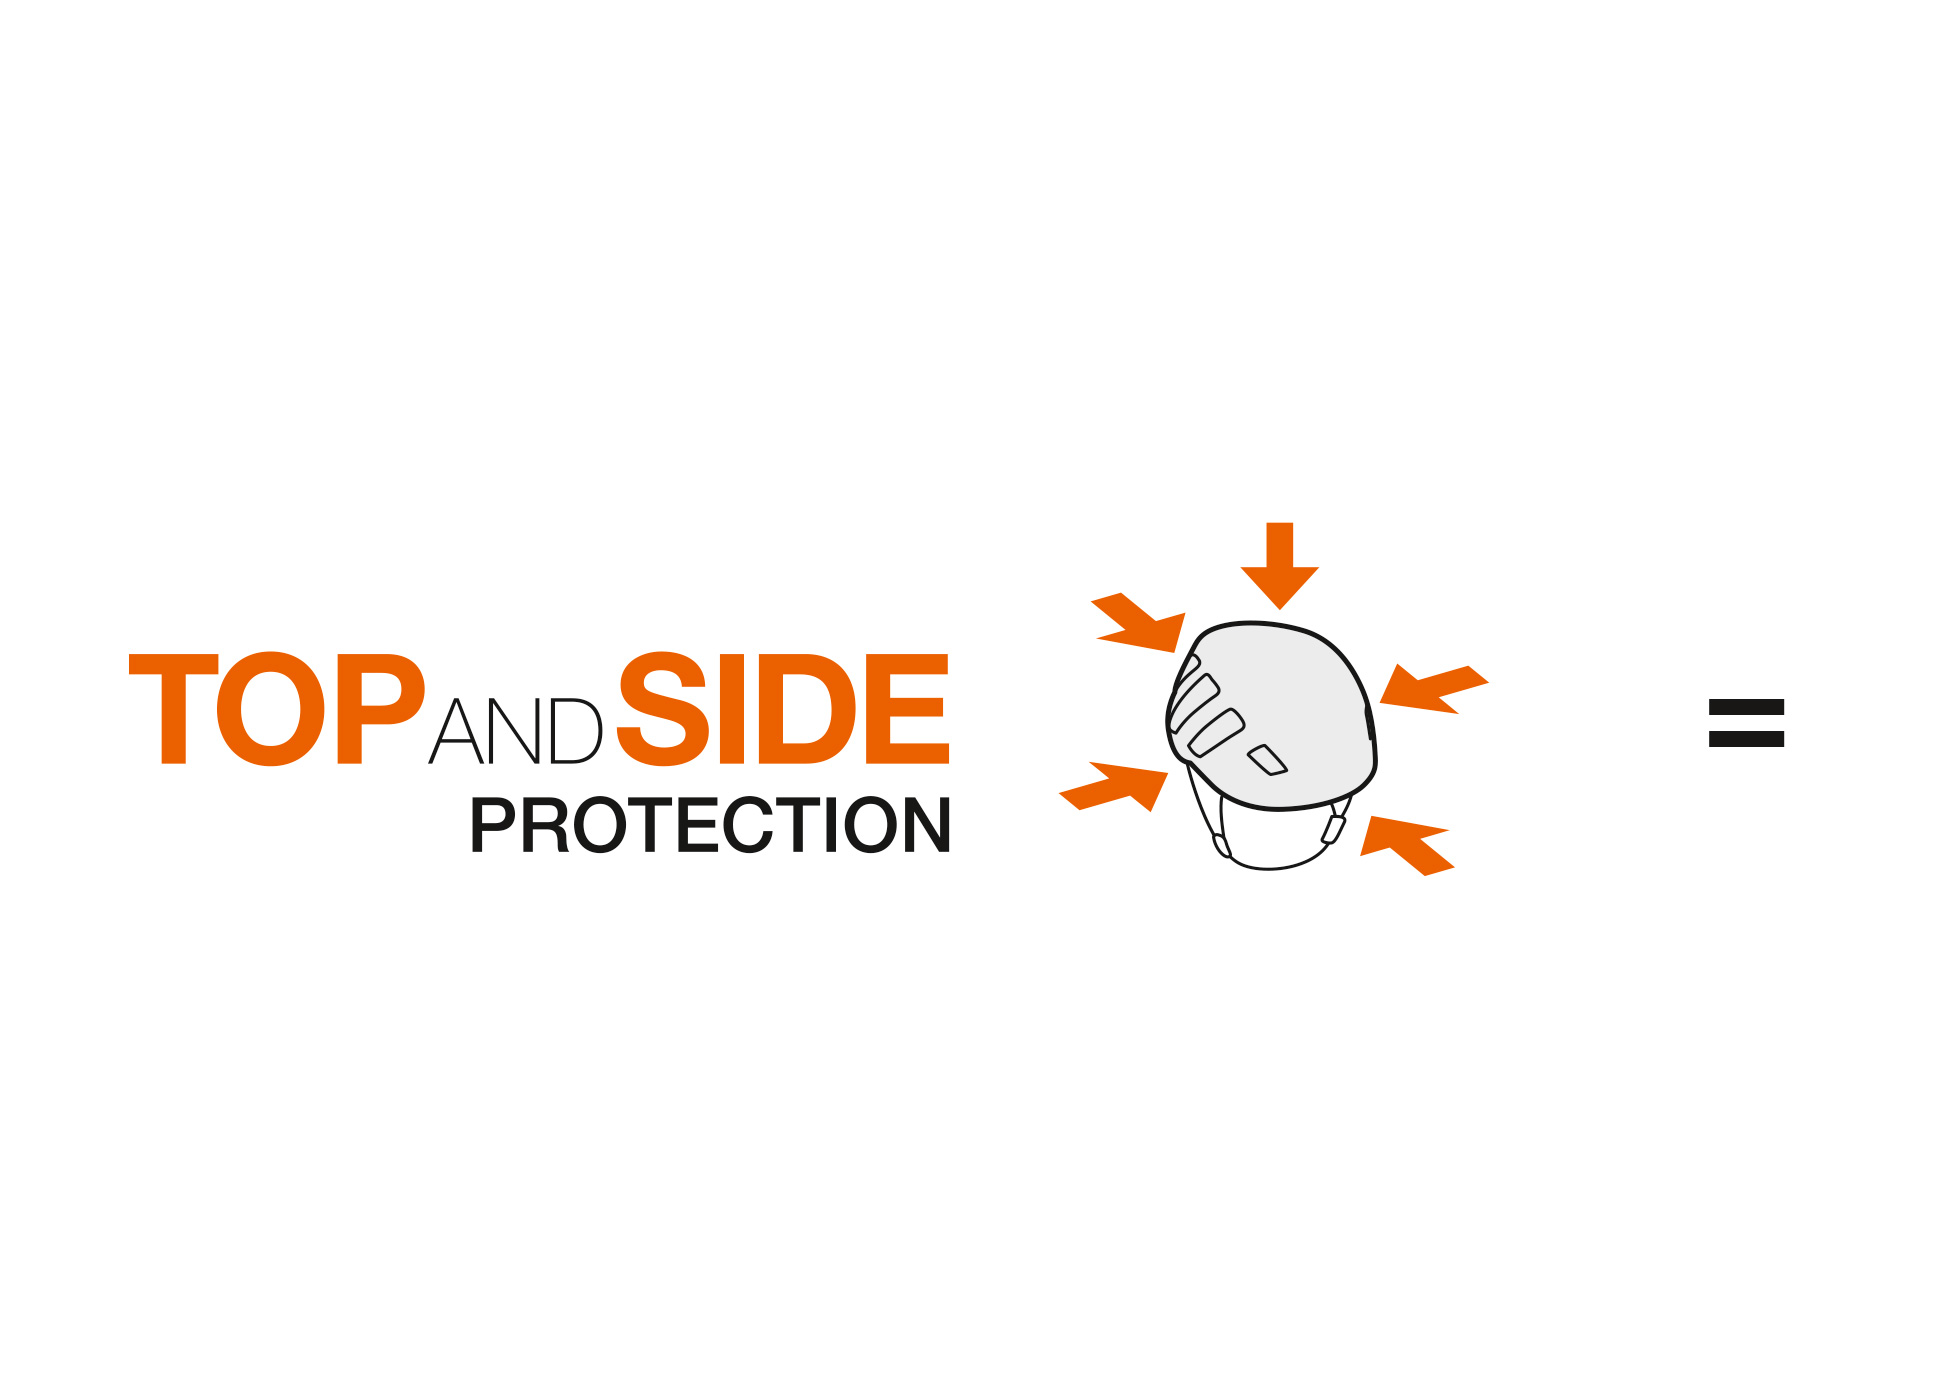 TOP AND SIDE PROTECTION